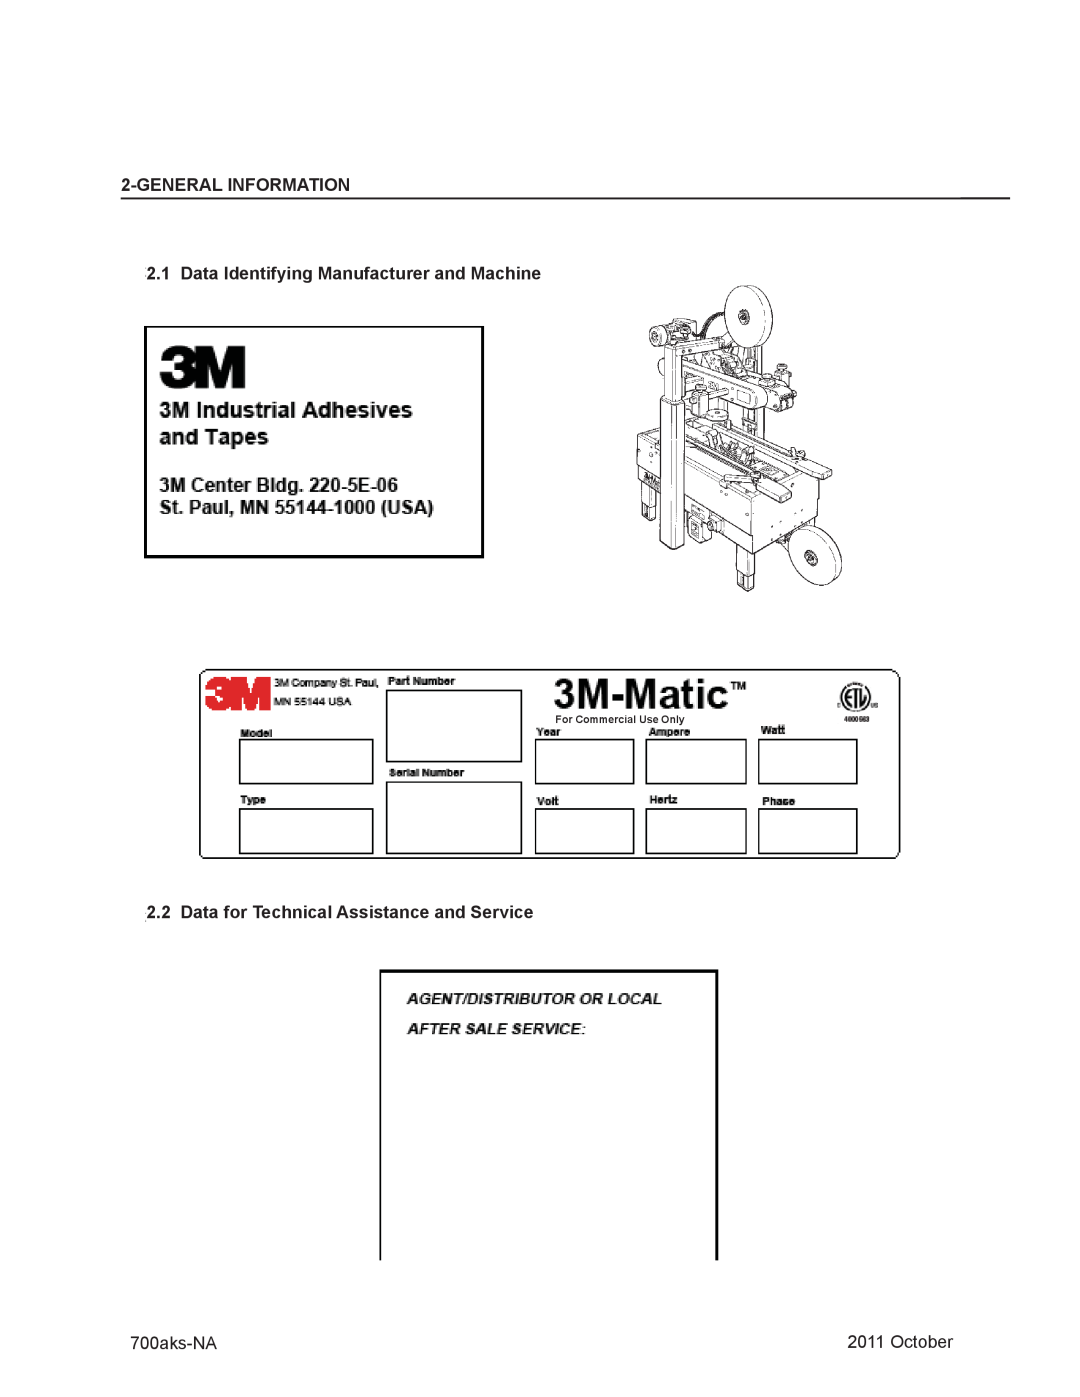 3M 40800 Generalinformation, Data Identifying Manufacturer and Machine, Data for Technical Assistance and Service, October 